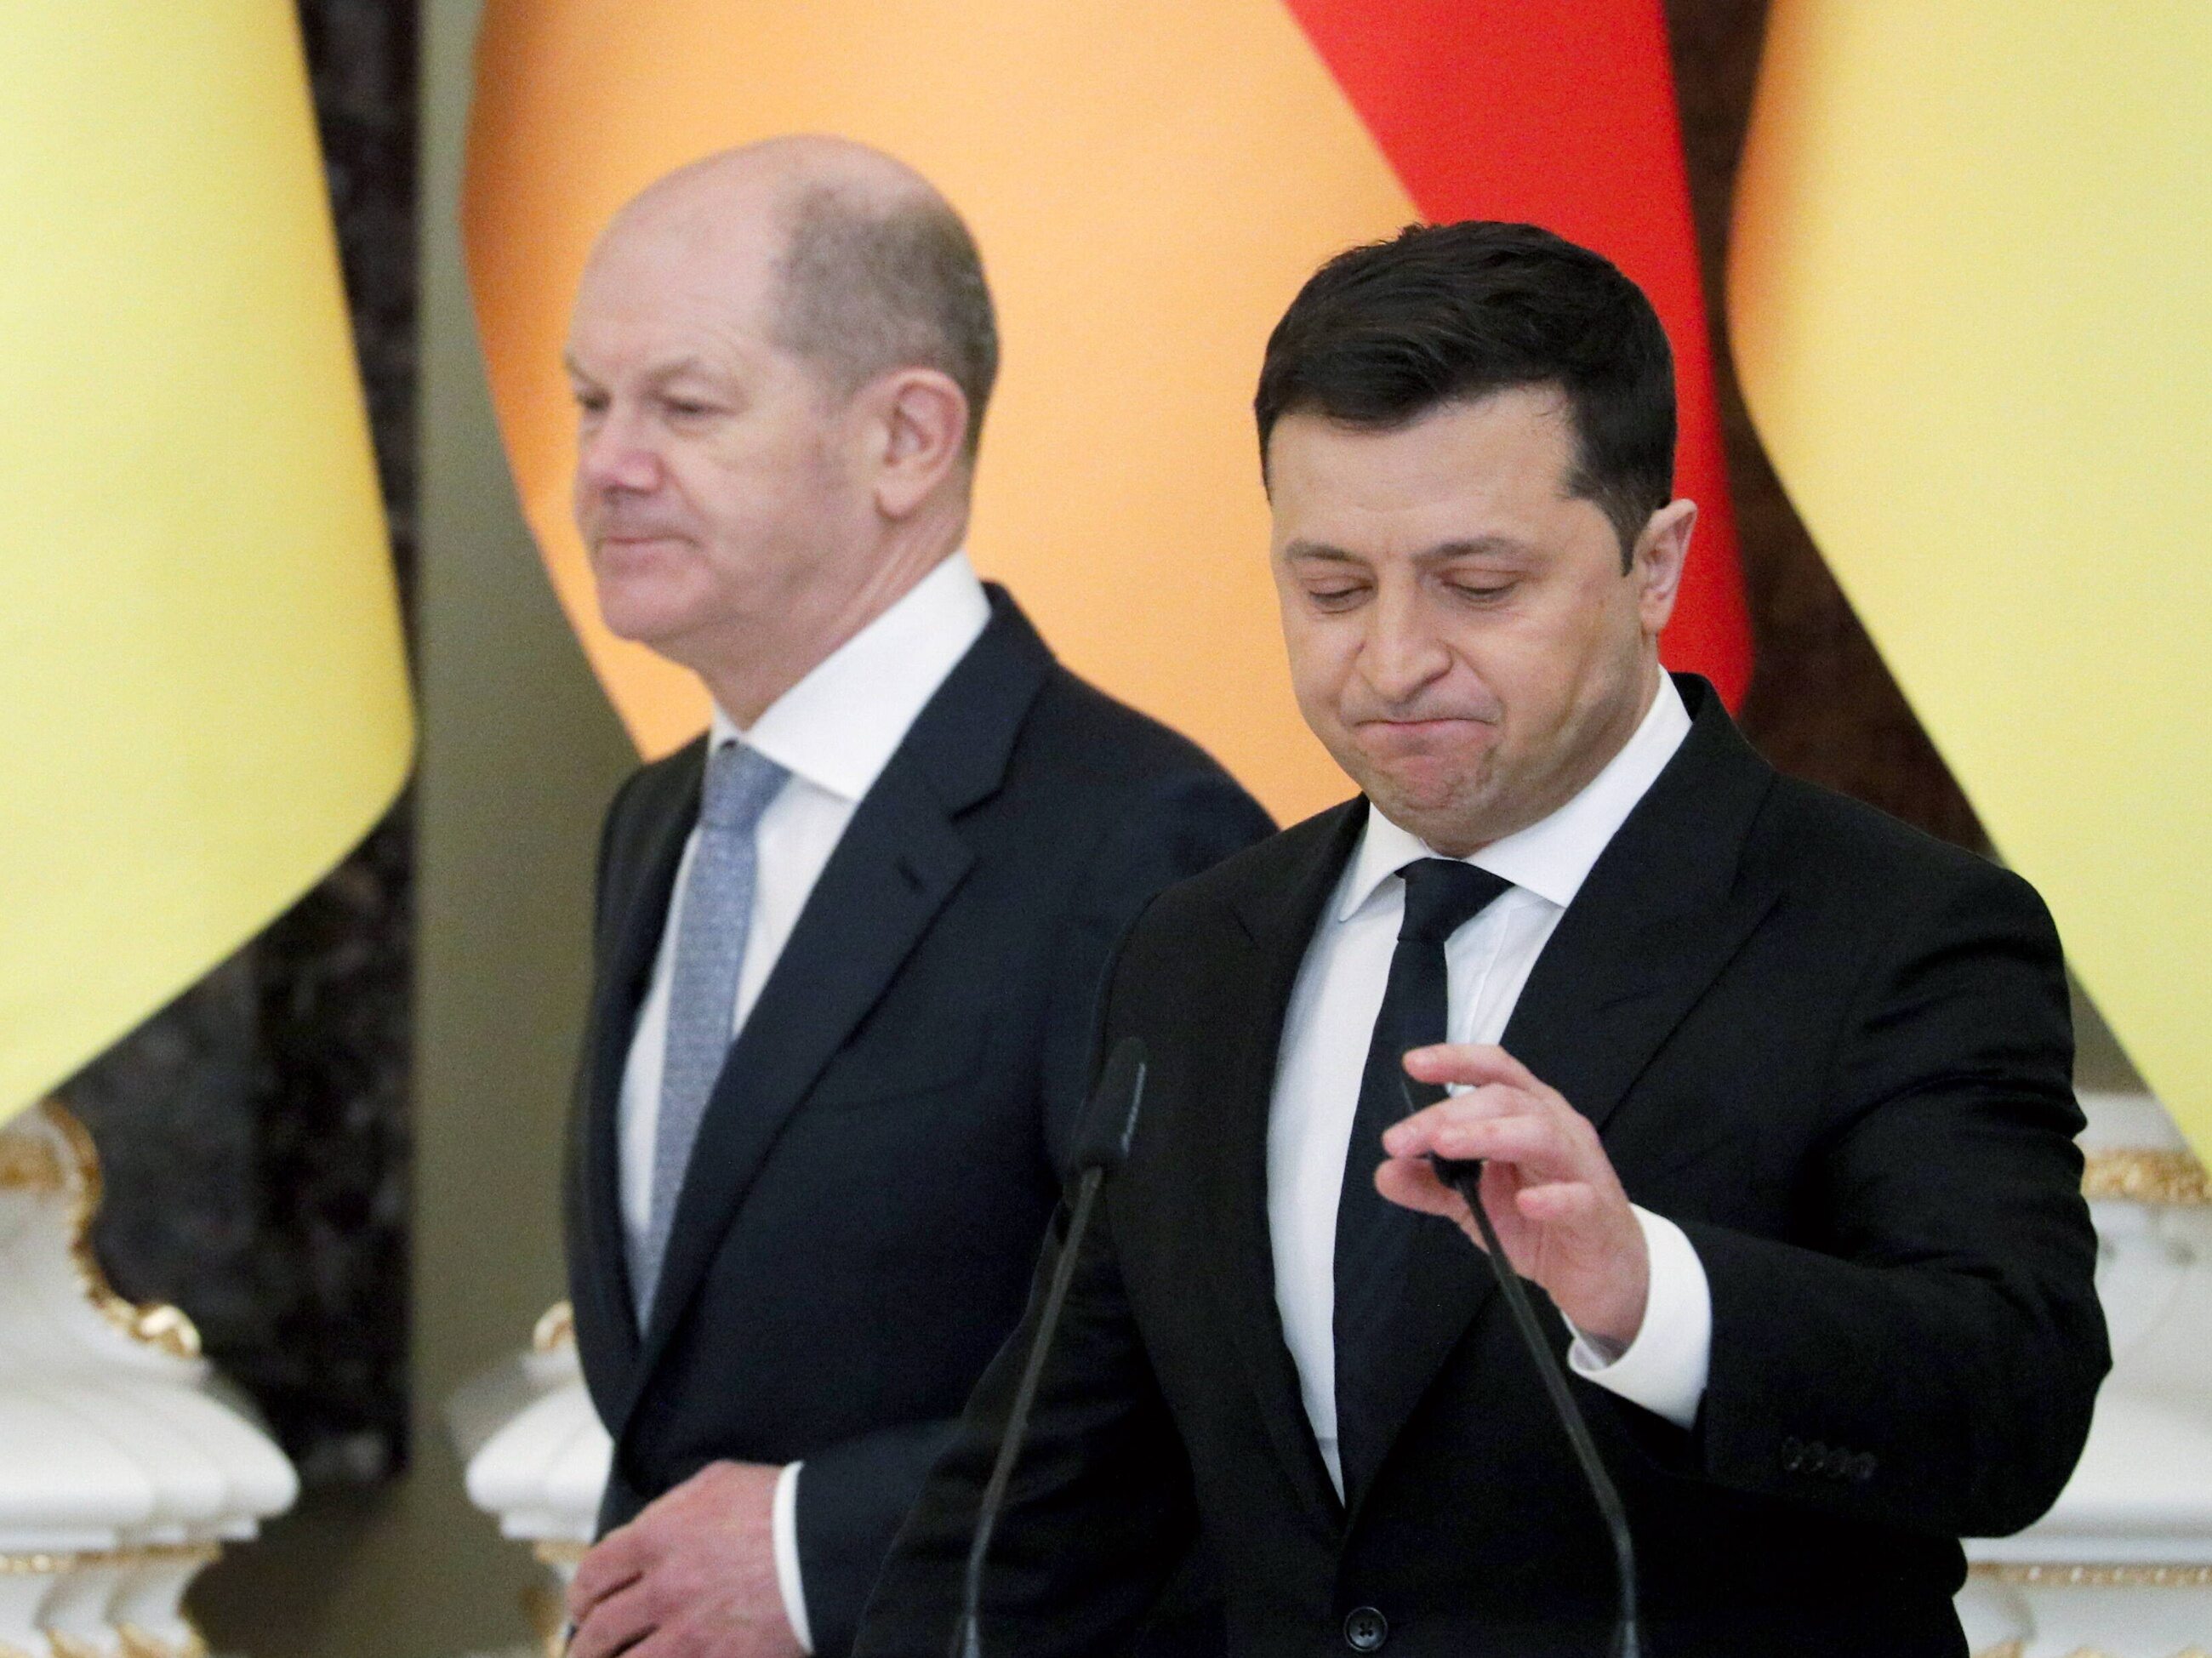 Ukraine’s decision is a problem for Germany